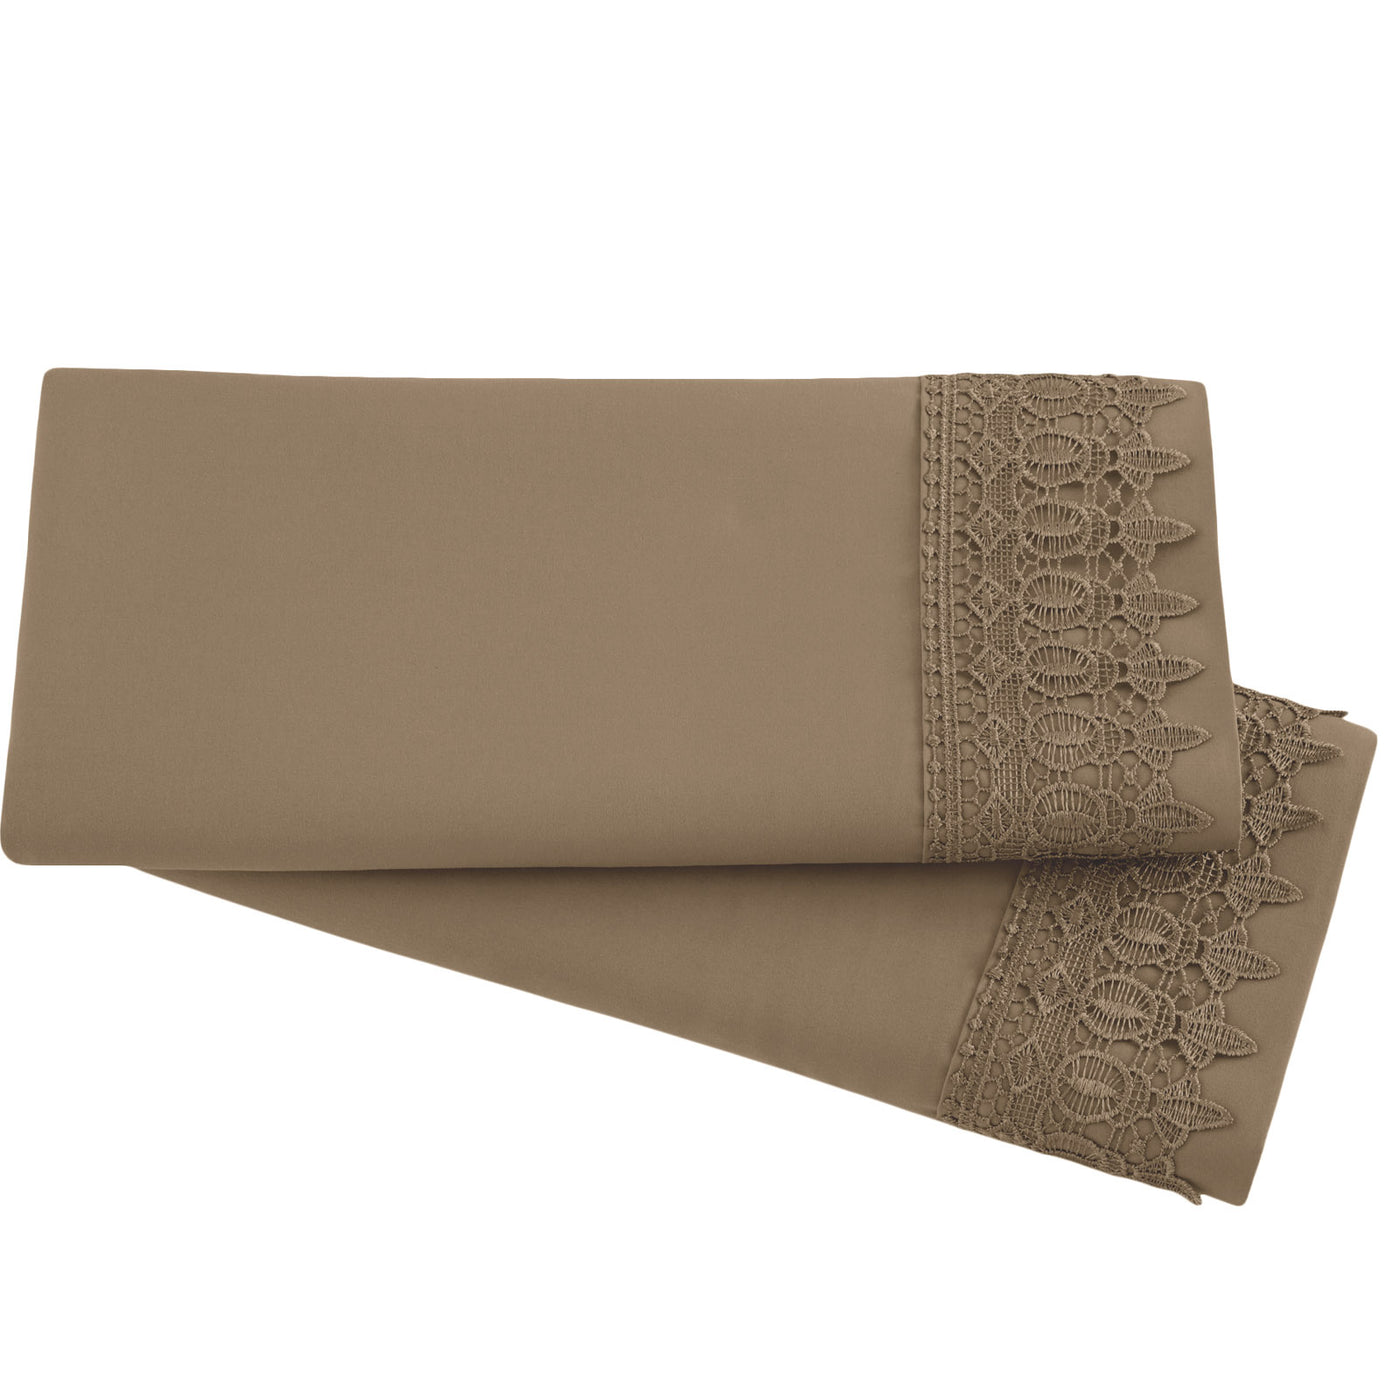 2-Piece Lace Pillowcase Set in Taupe